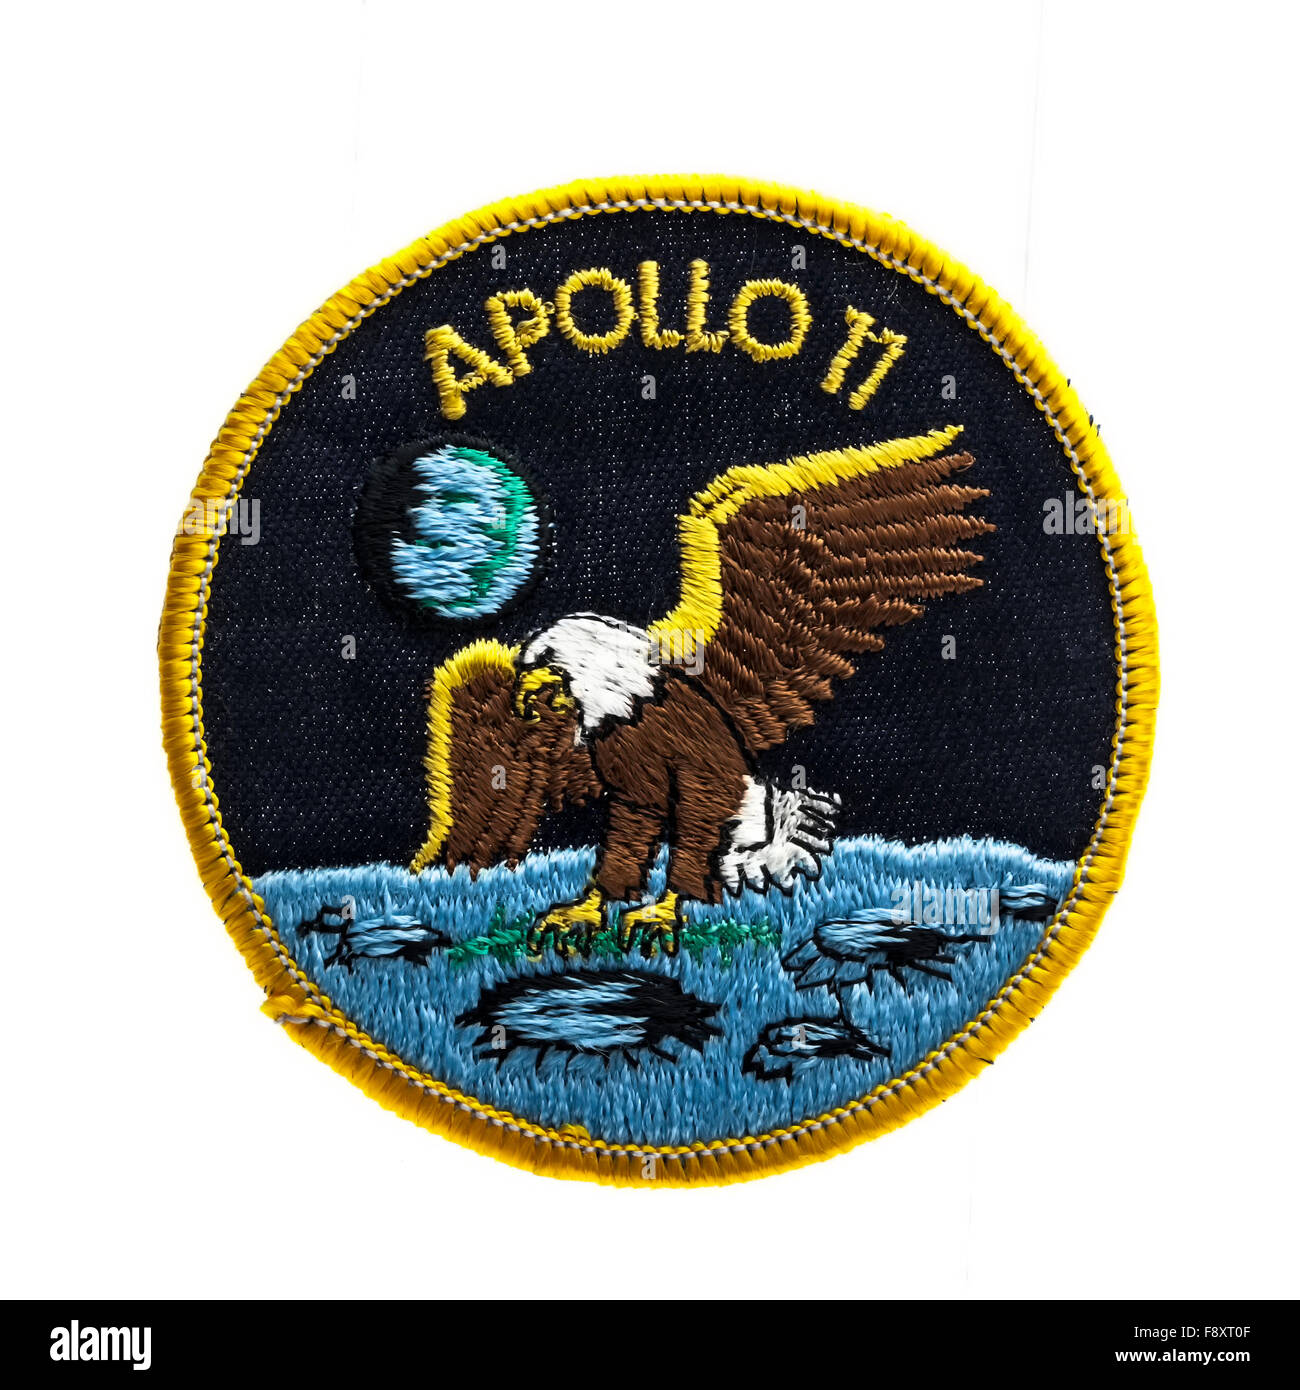 Apollo 11 Mission Badge from the first Moon landing in 1969 on a White Background Stock Photo